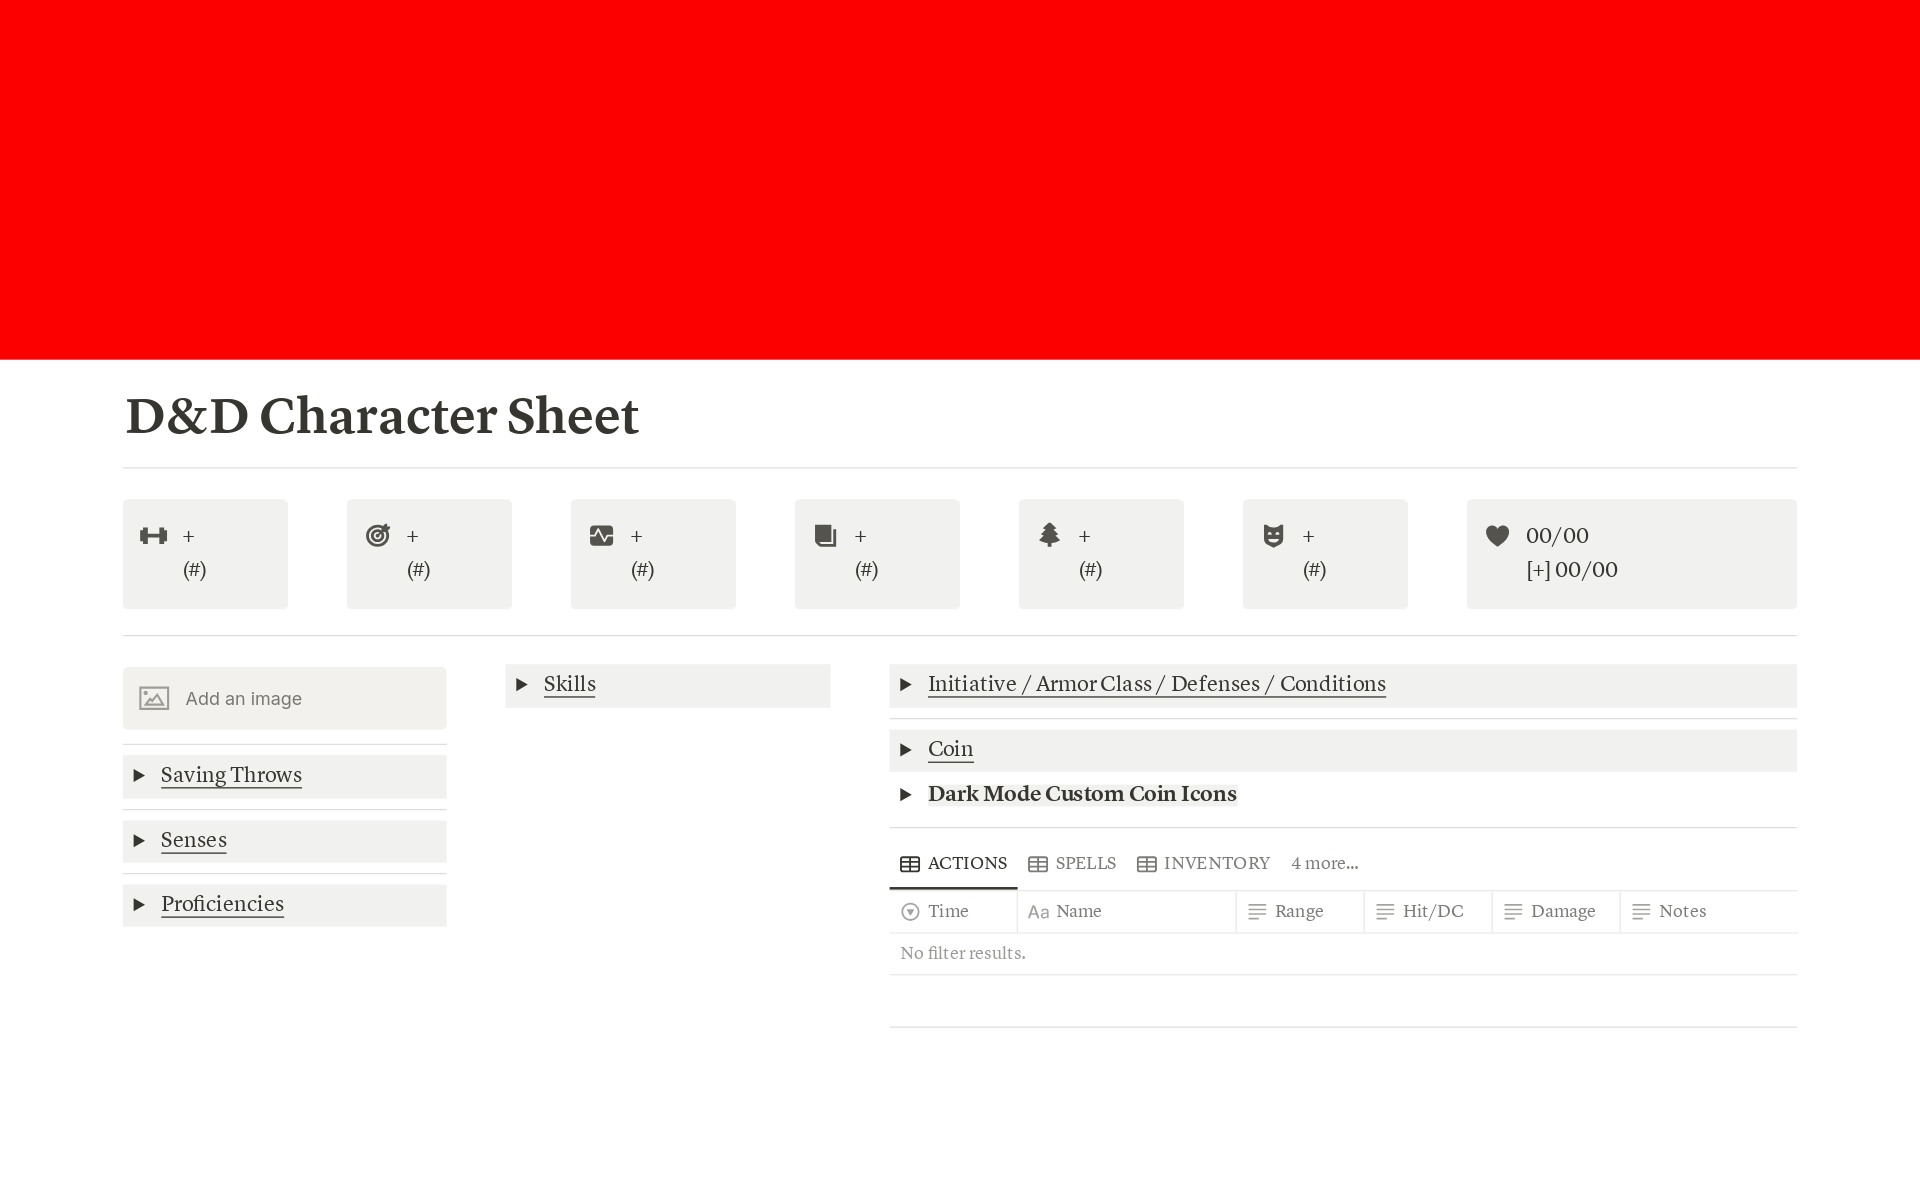 Party full on D&D Beyond? Use this template to simulate D&D Beyond's character sheet layout and create countless characters, organized beautifully into your Notion workspace!